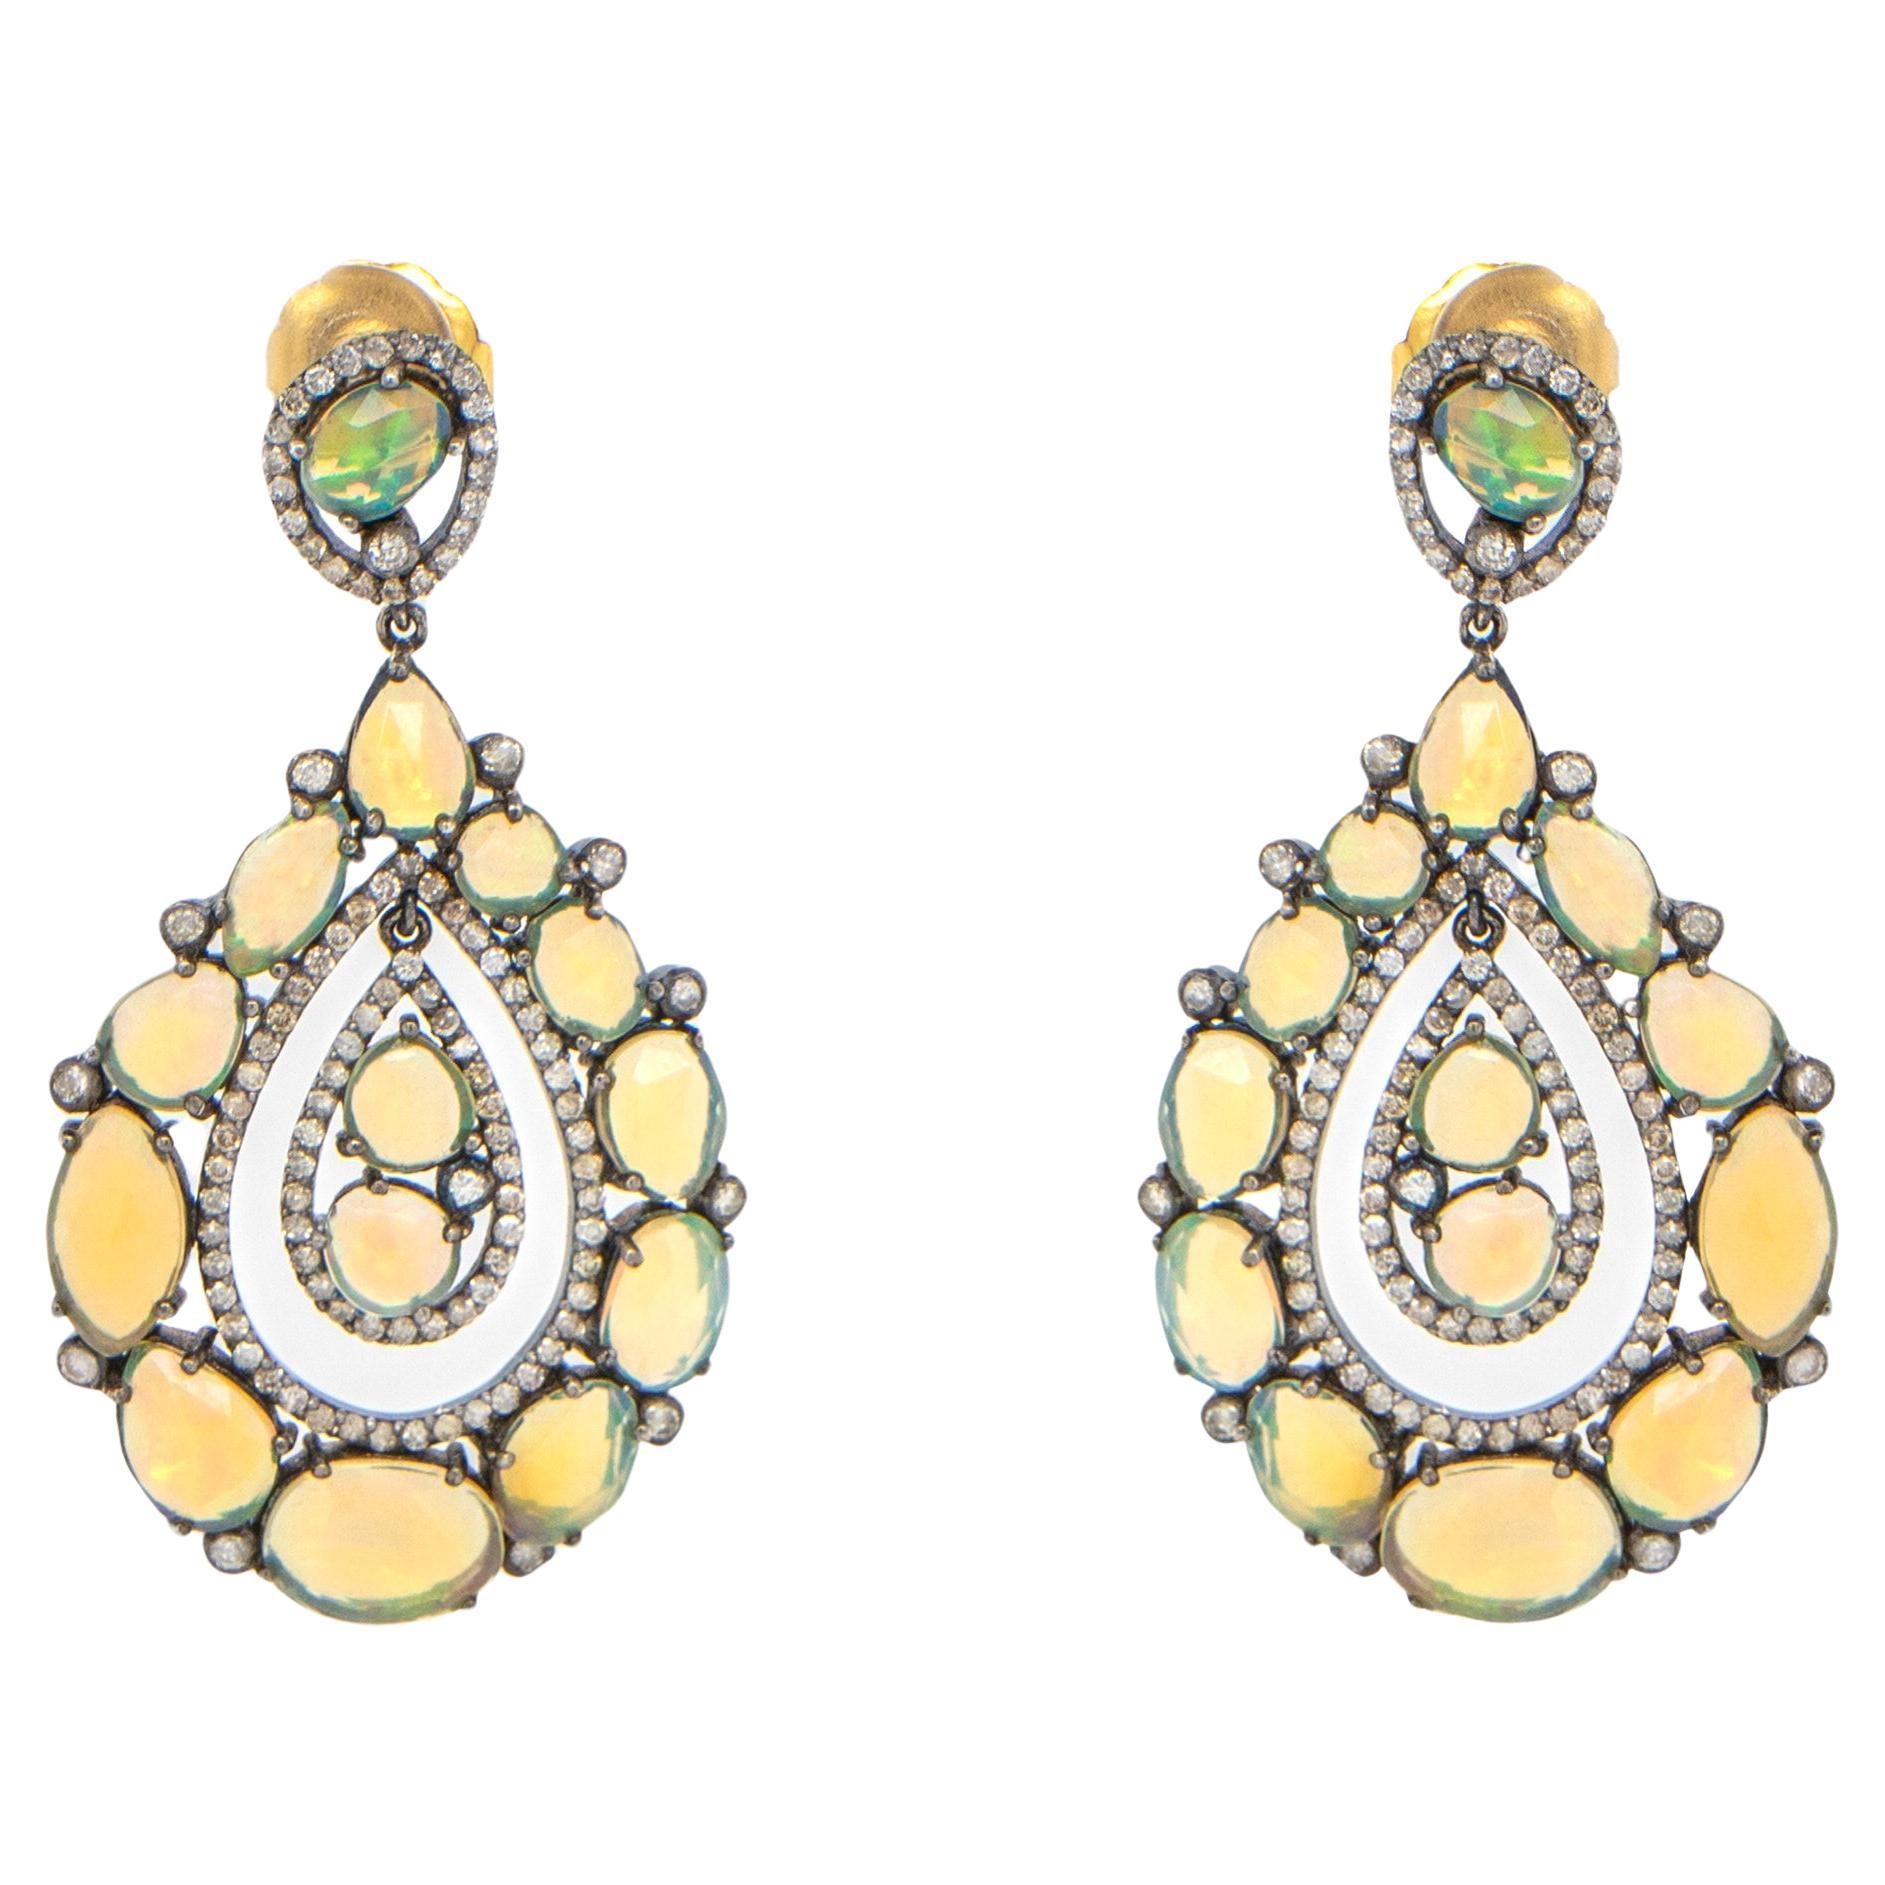 Faceted Opals and Diamond Earrings 26 Carats Total 14k Gold and Silver